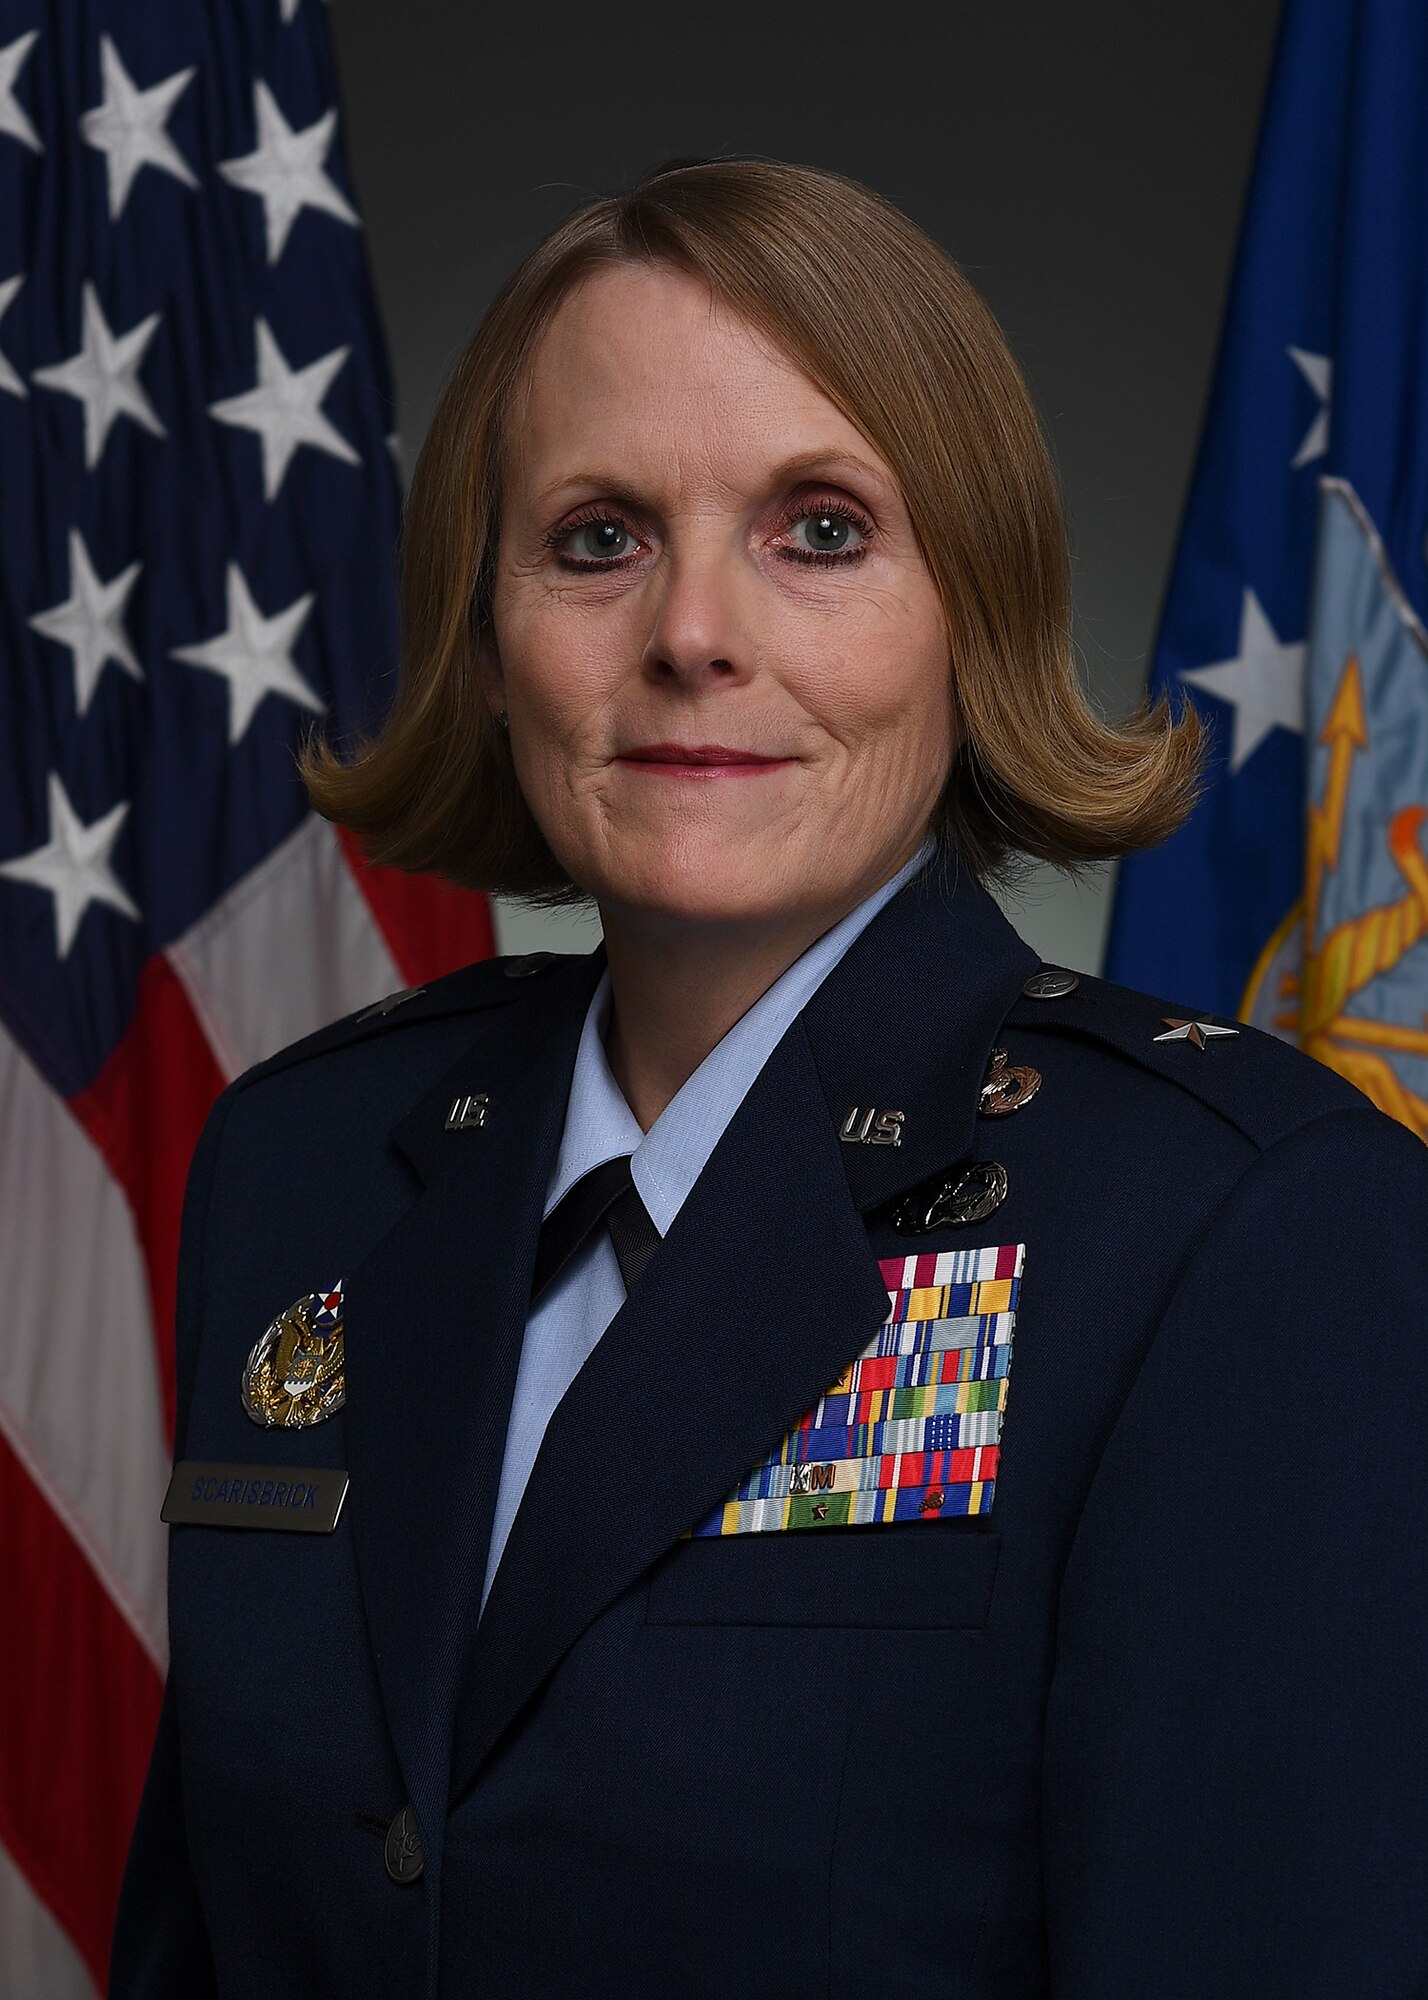 Official photo of Brig. Gen. Stacey Scarisbrick